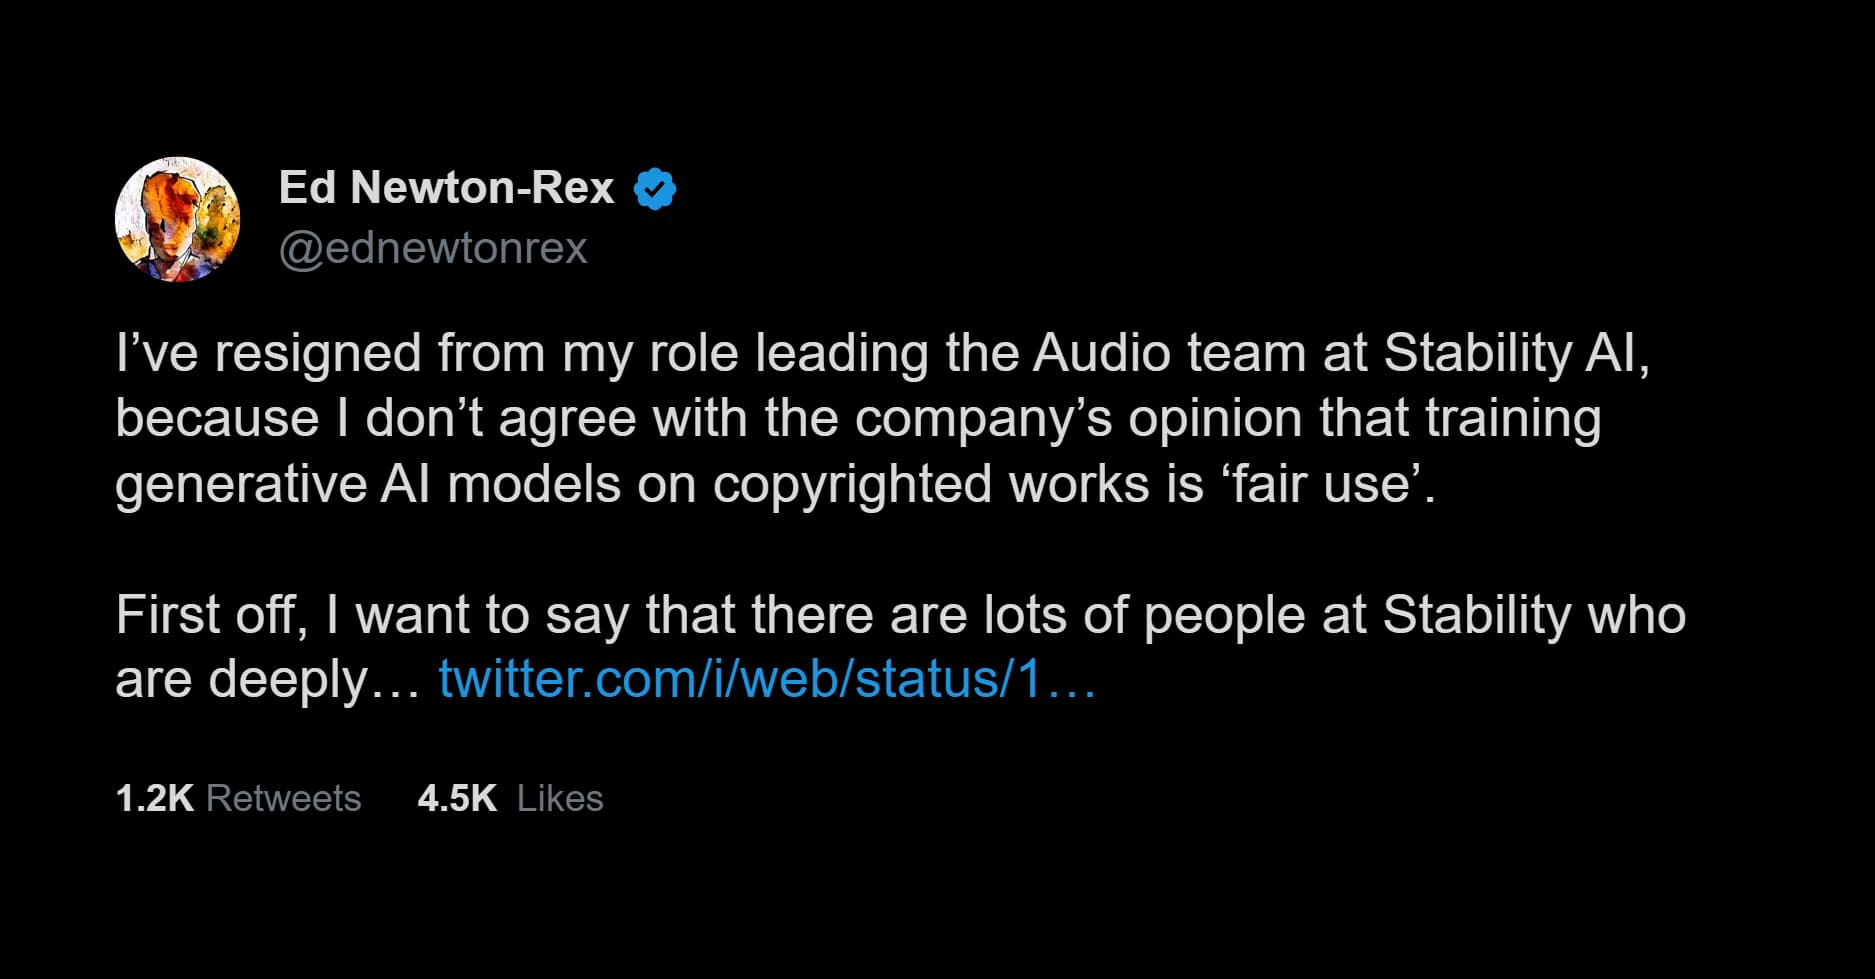 Ed Newton-Rex, Head Of Audio at Stability AI Resigned